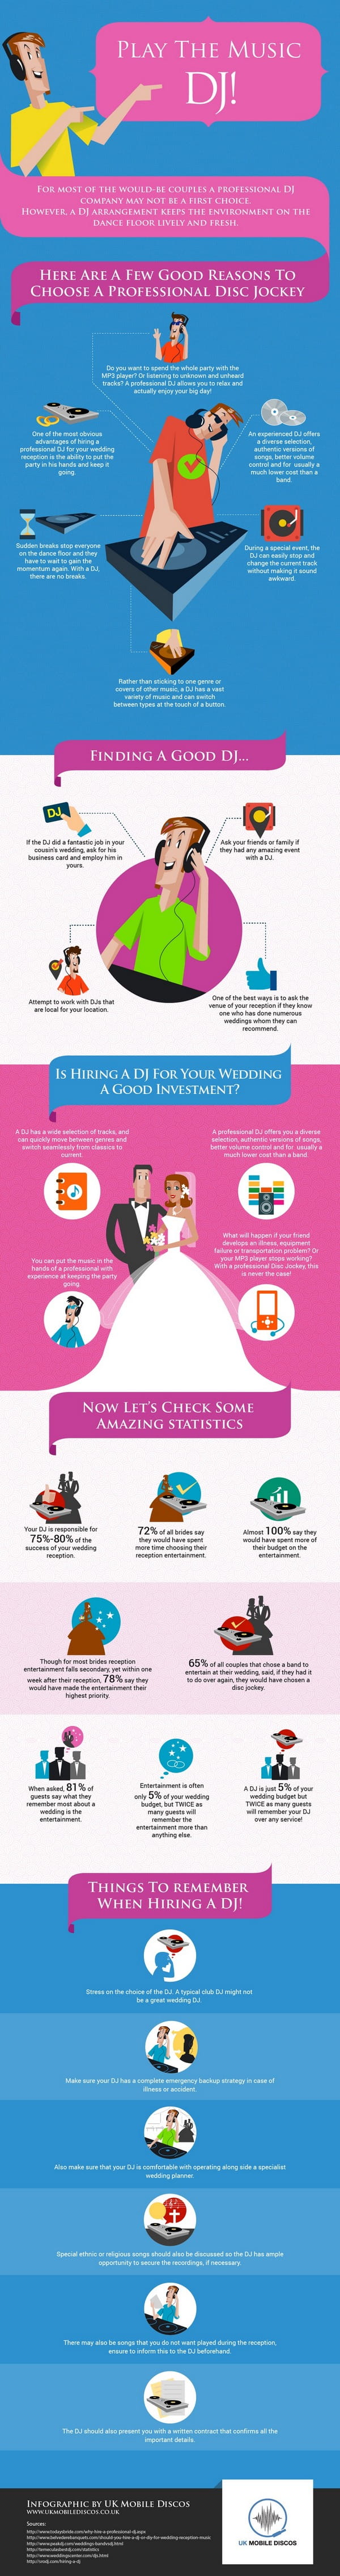 Reasons to Choose a Professional Wedding DJ Infographic